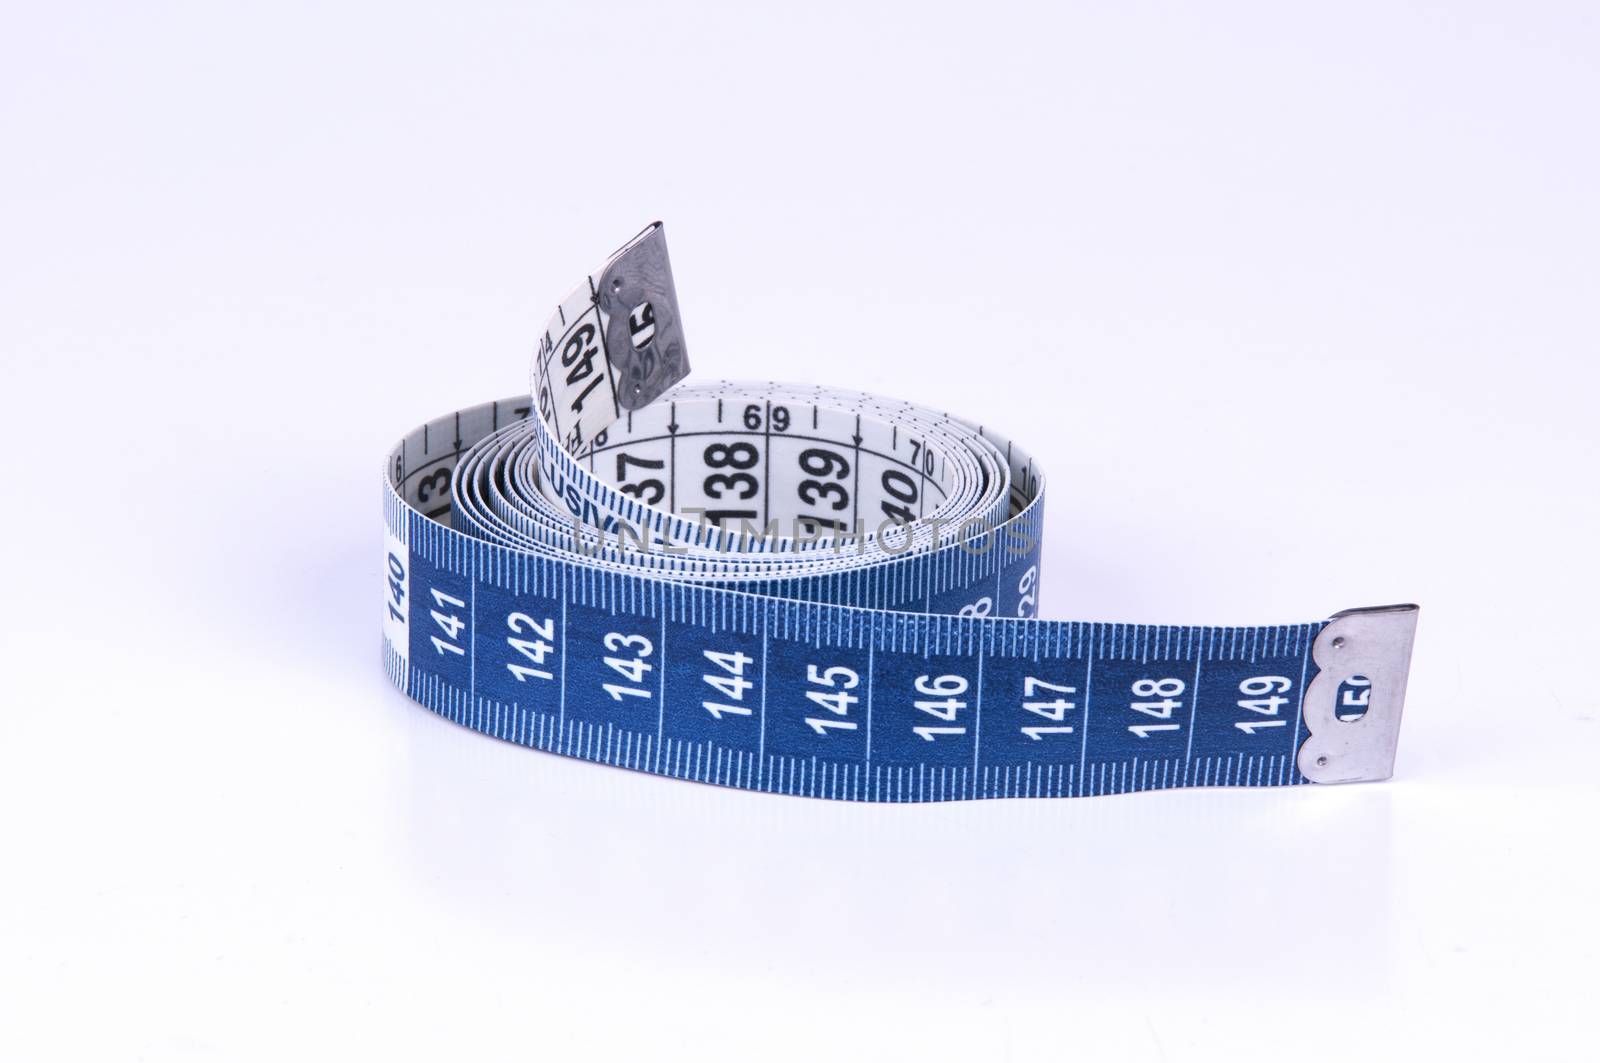 A tape measure or measuring tape is a flexible ruler on white background